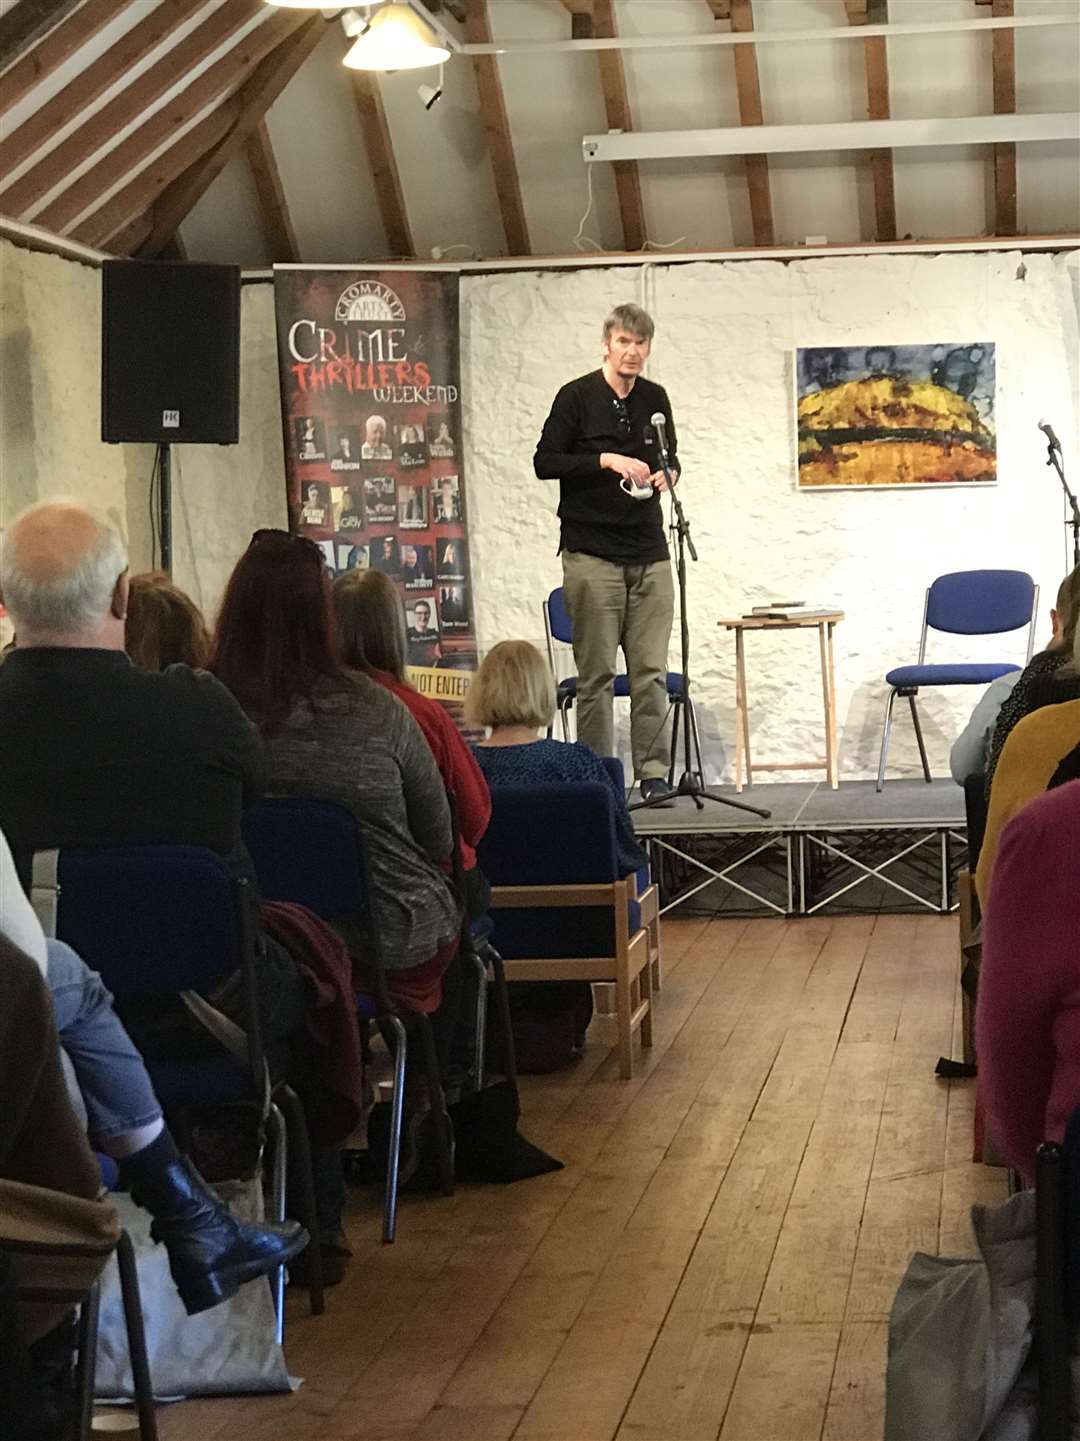 Crime writer Ian Rankin opened Saturday's events at The Stables in Cromarty.